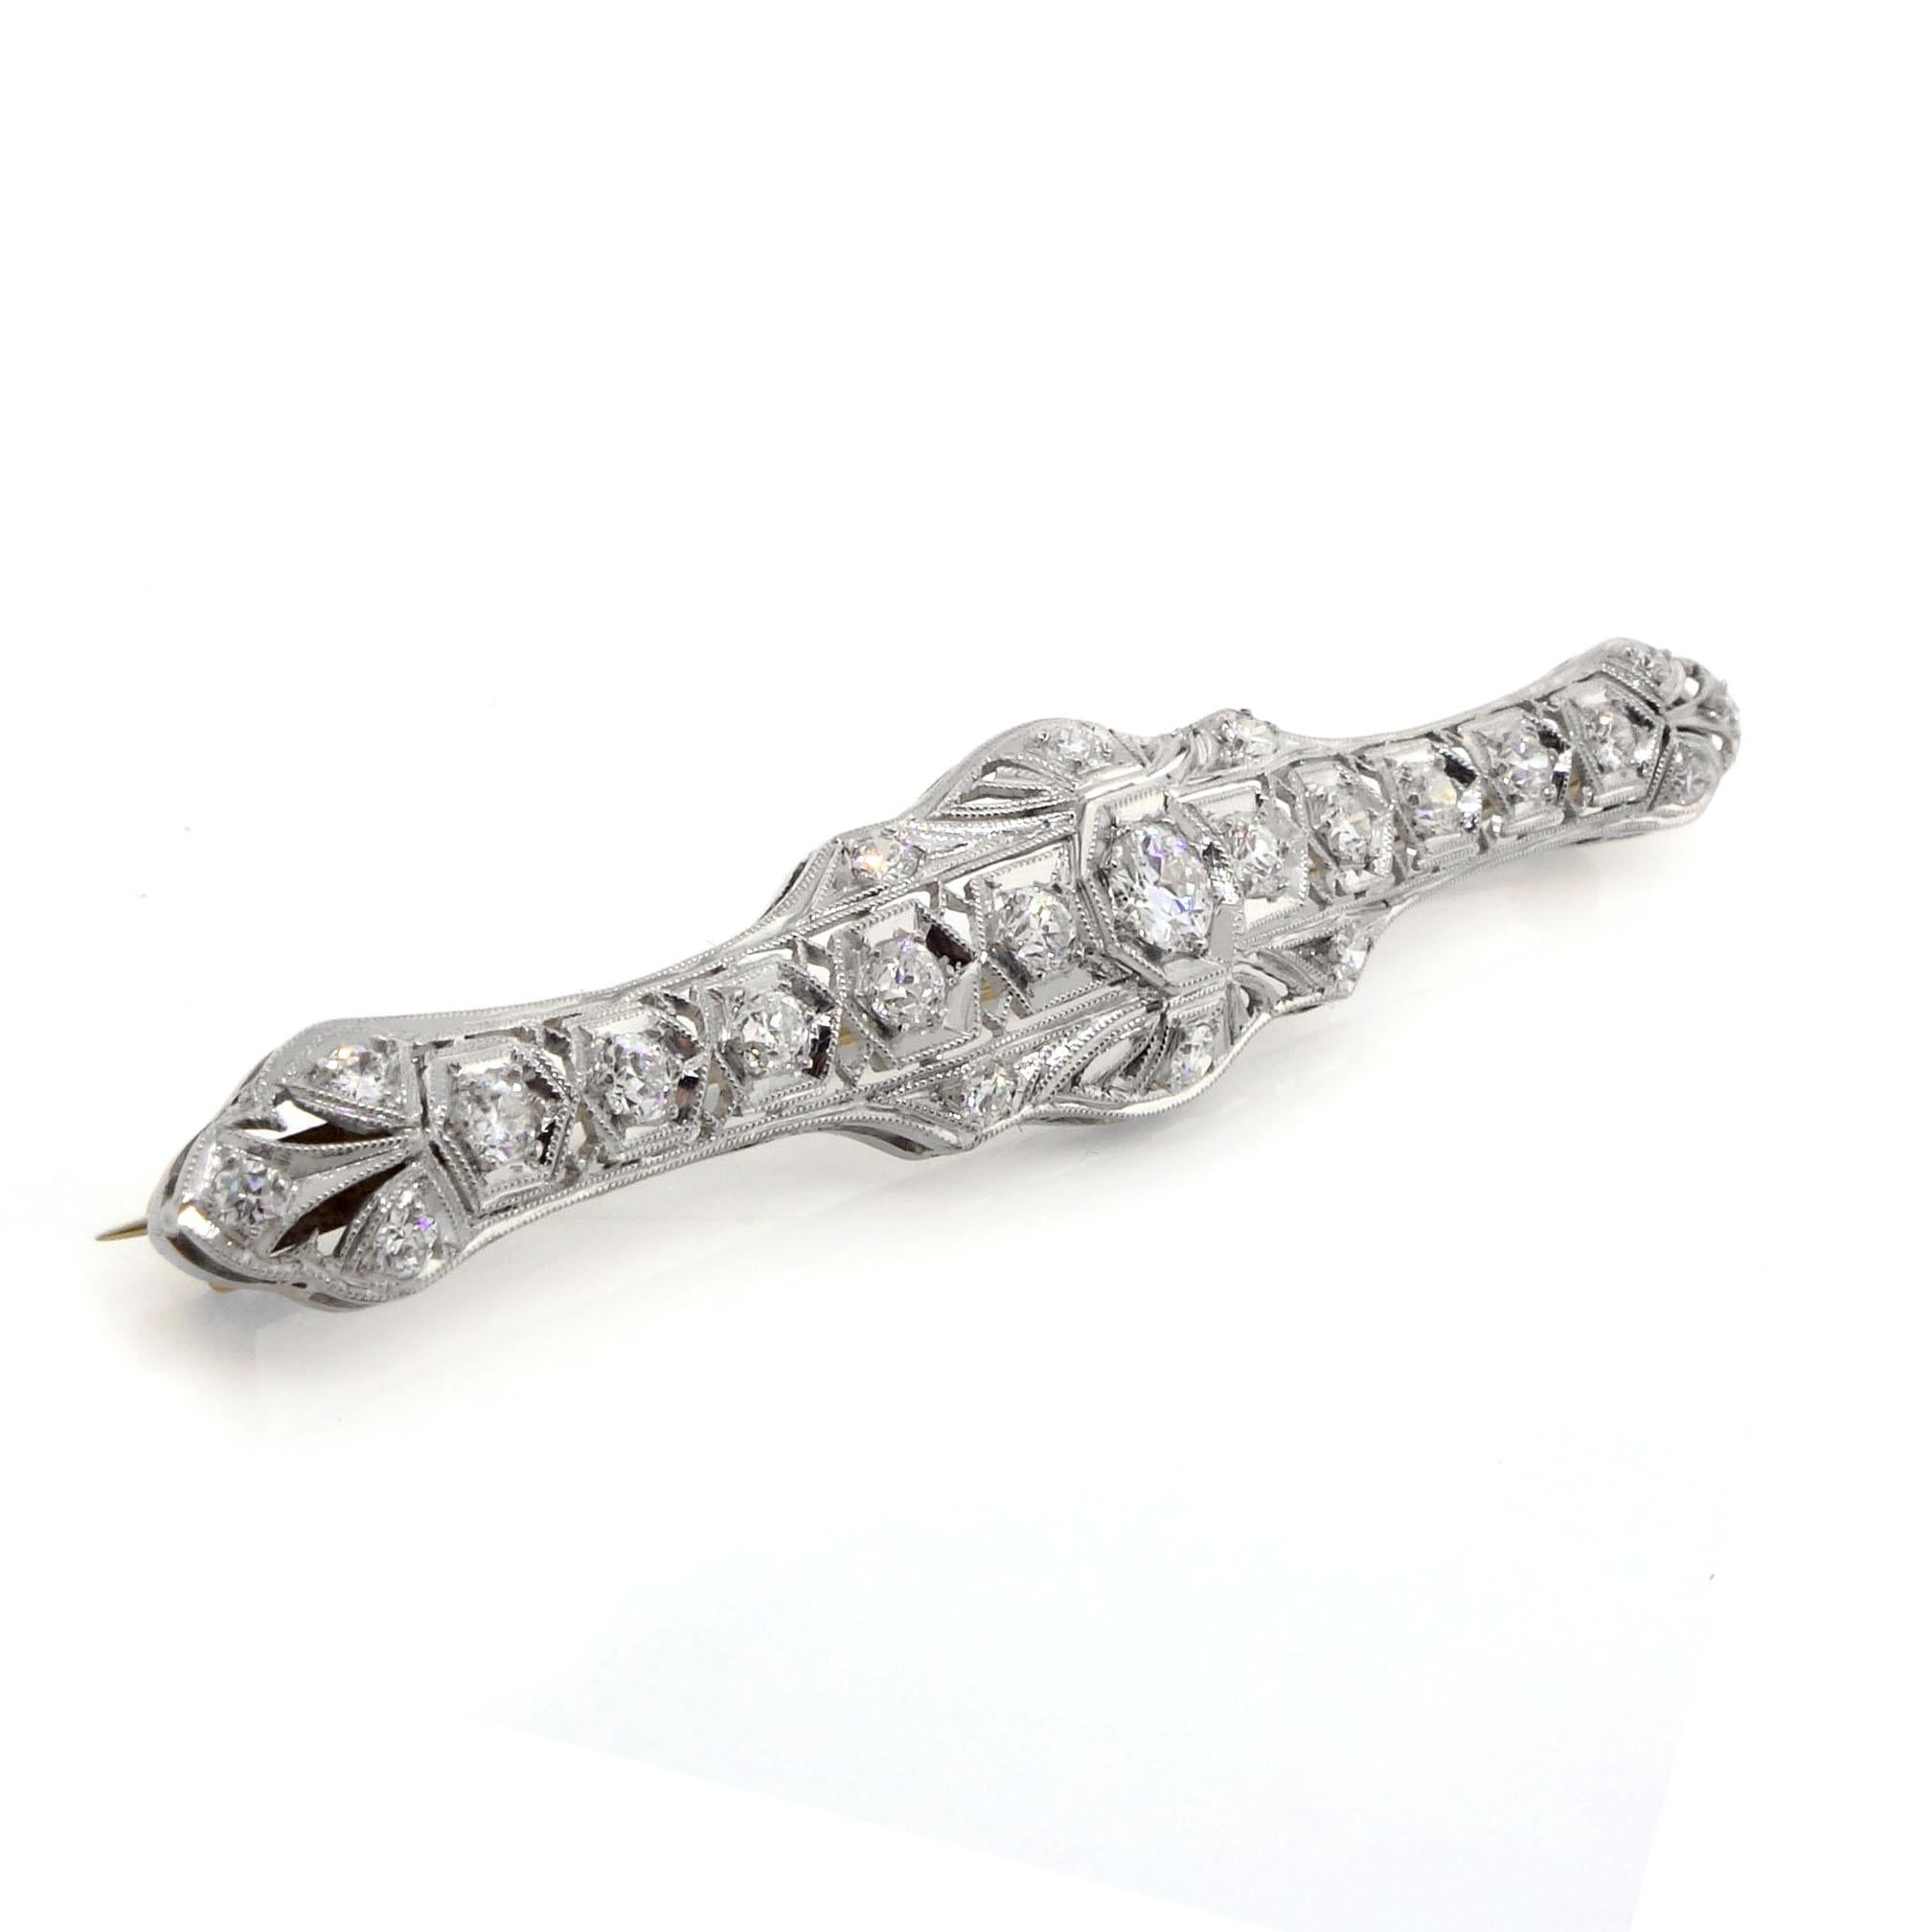 This 1920’s diamond brooch is made of platinum and set with over 3.00-carats of dazzling diamonds. Lovely openwork design features collet-set and bead-set old circular-cut diamonds.

Details:
23 round cut diamonds of about 3.10 carat set in a